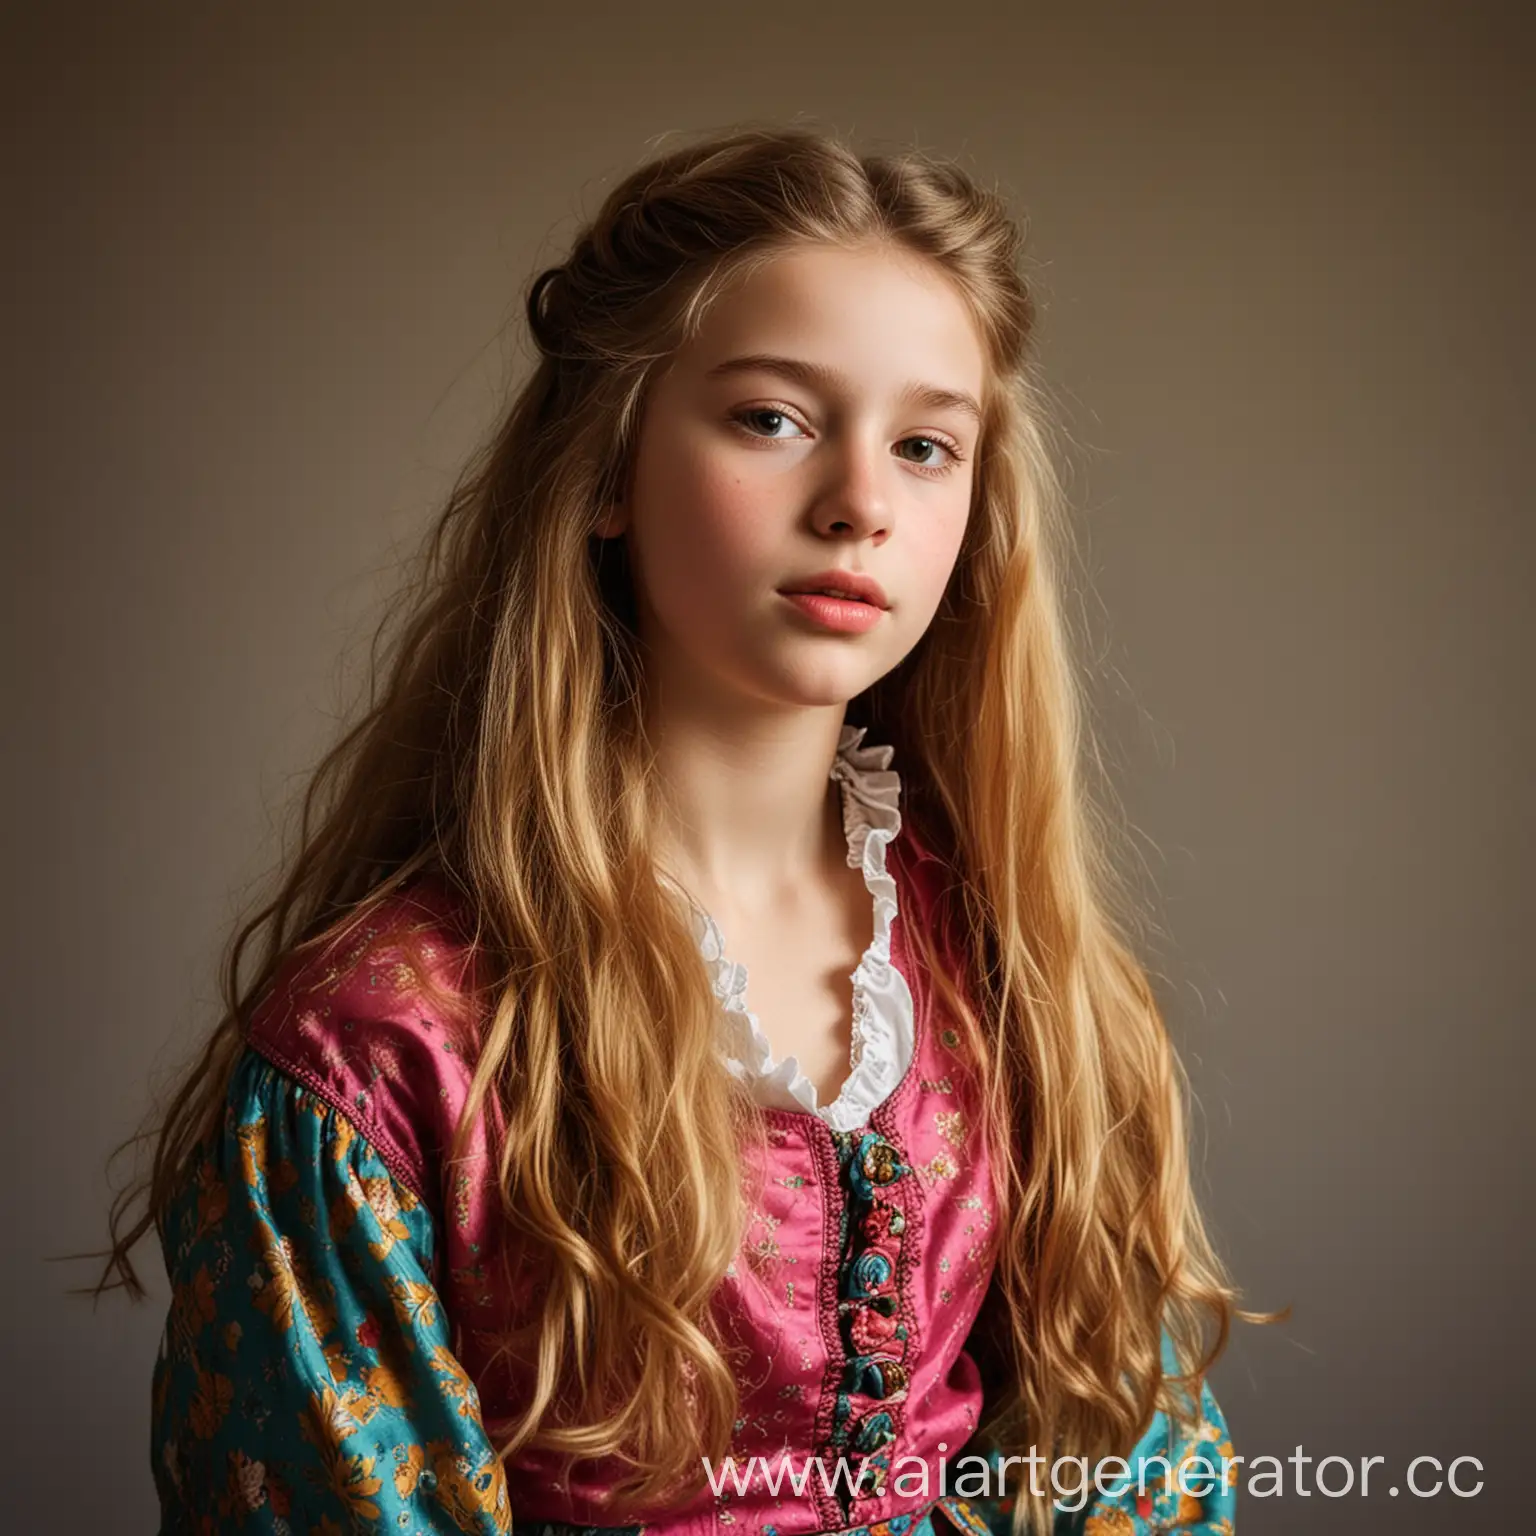 Portrait-of-a-12YearOld-Dutch-Girl-in-Colorful-17th-Century-Attire-with-Rembrandt-Lighting